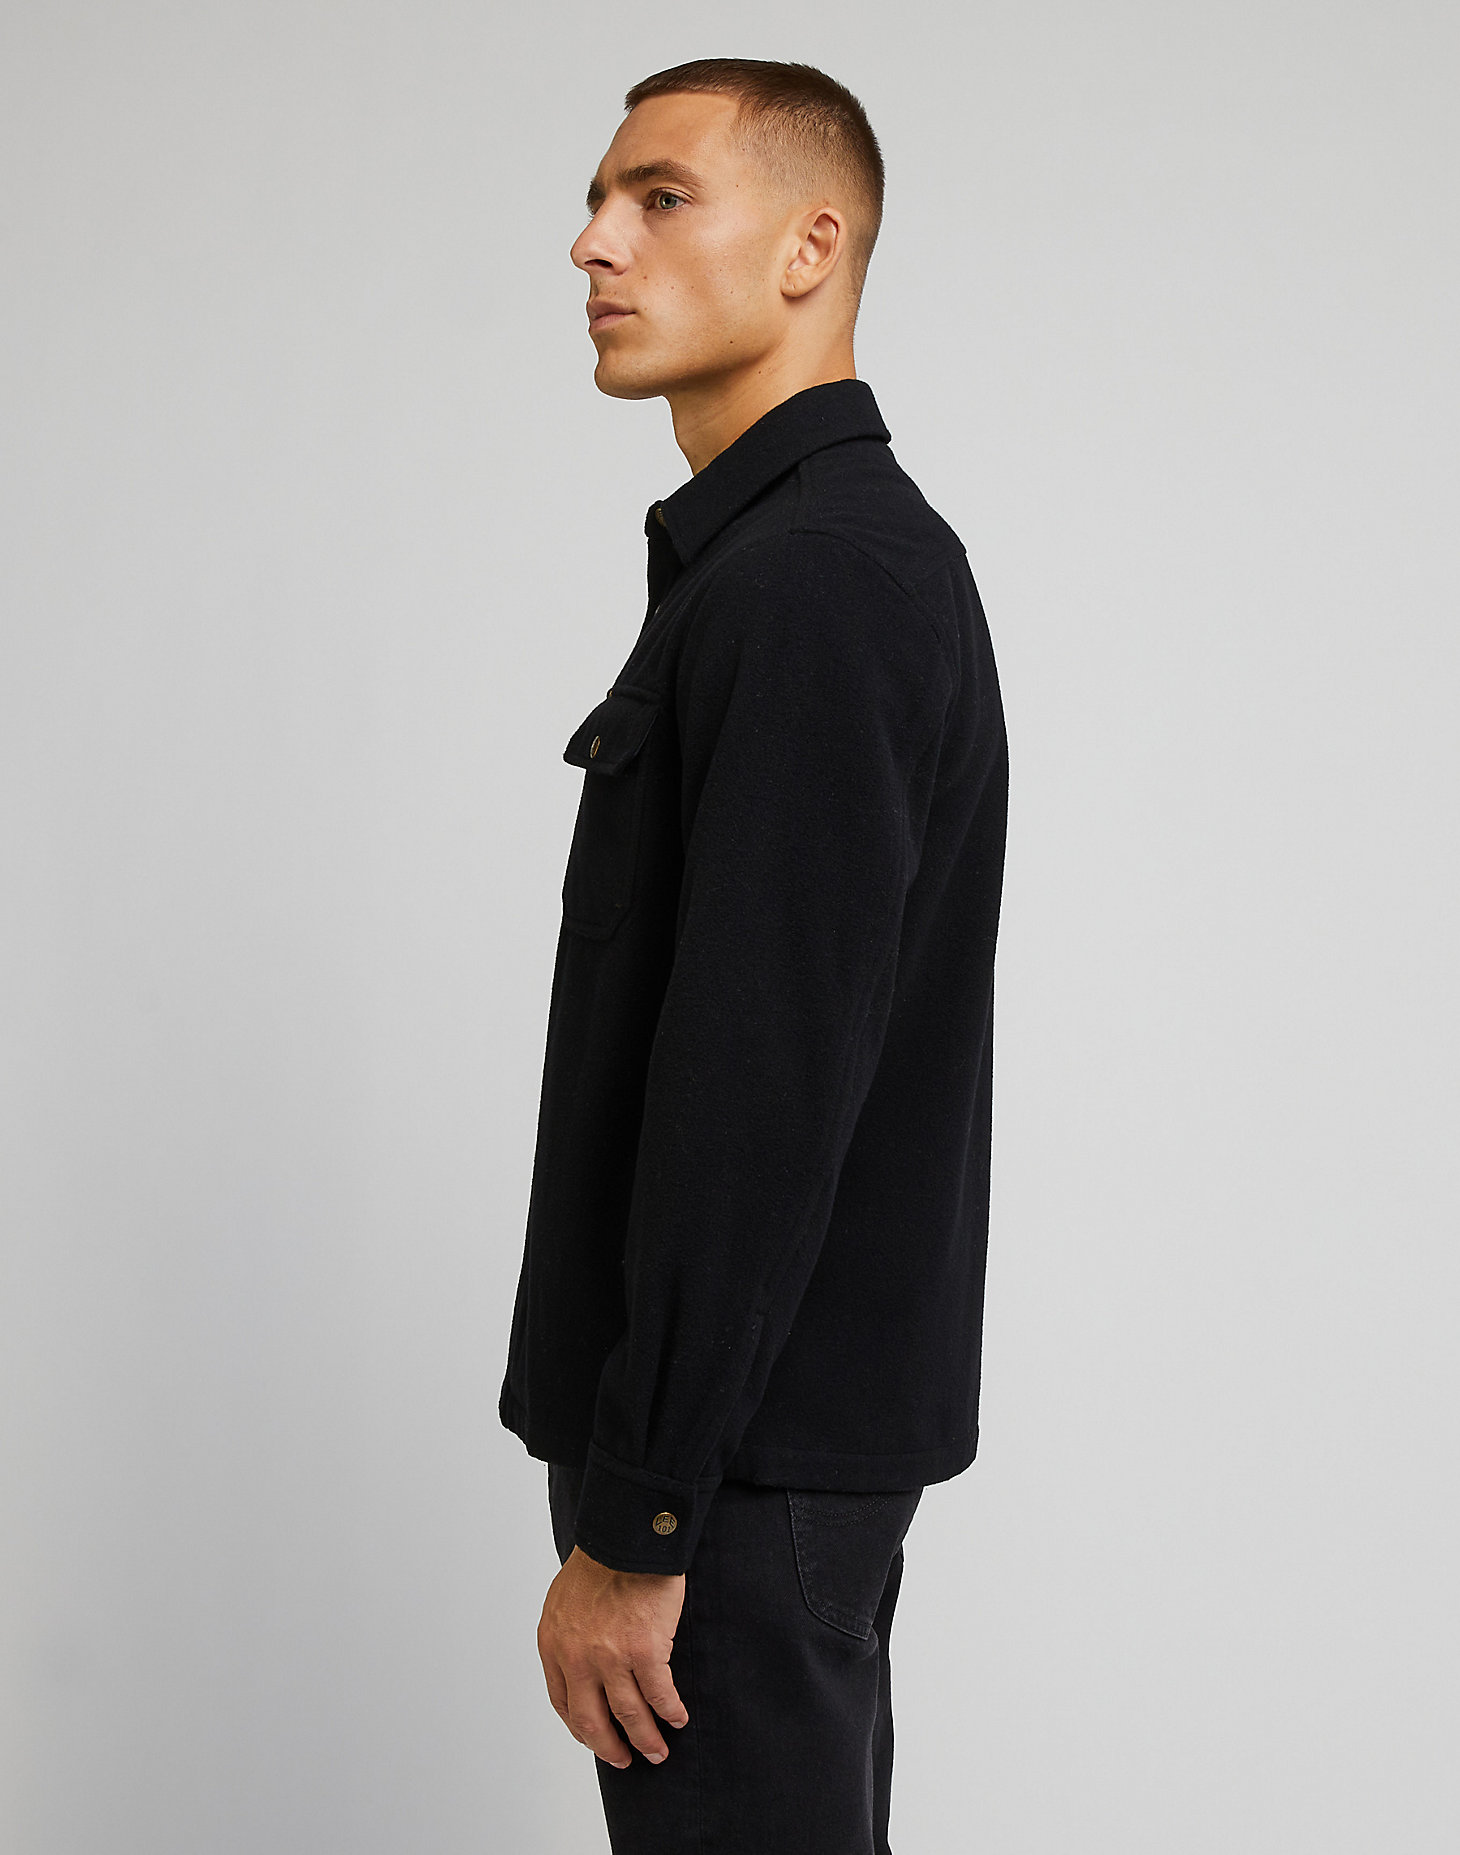 101 Overshirt in Washed Black alternative view 5